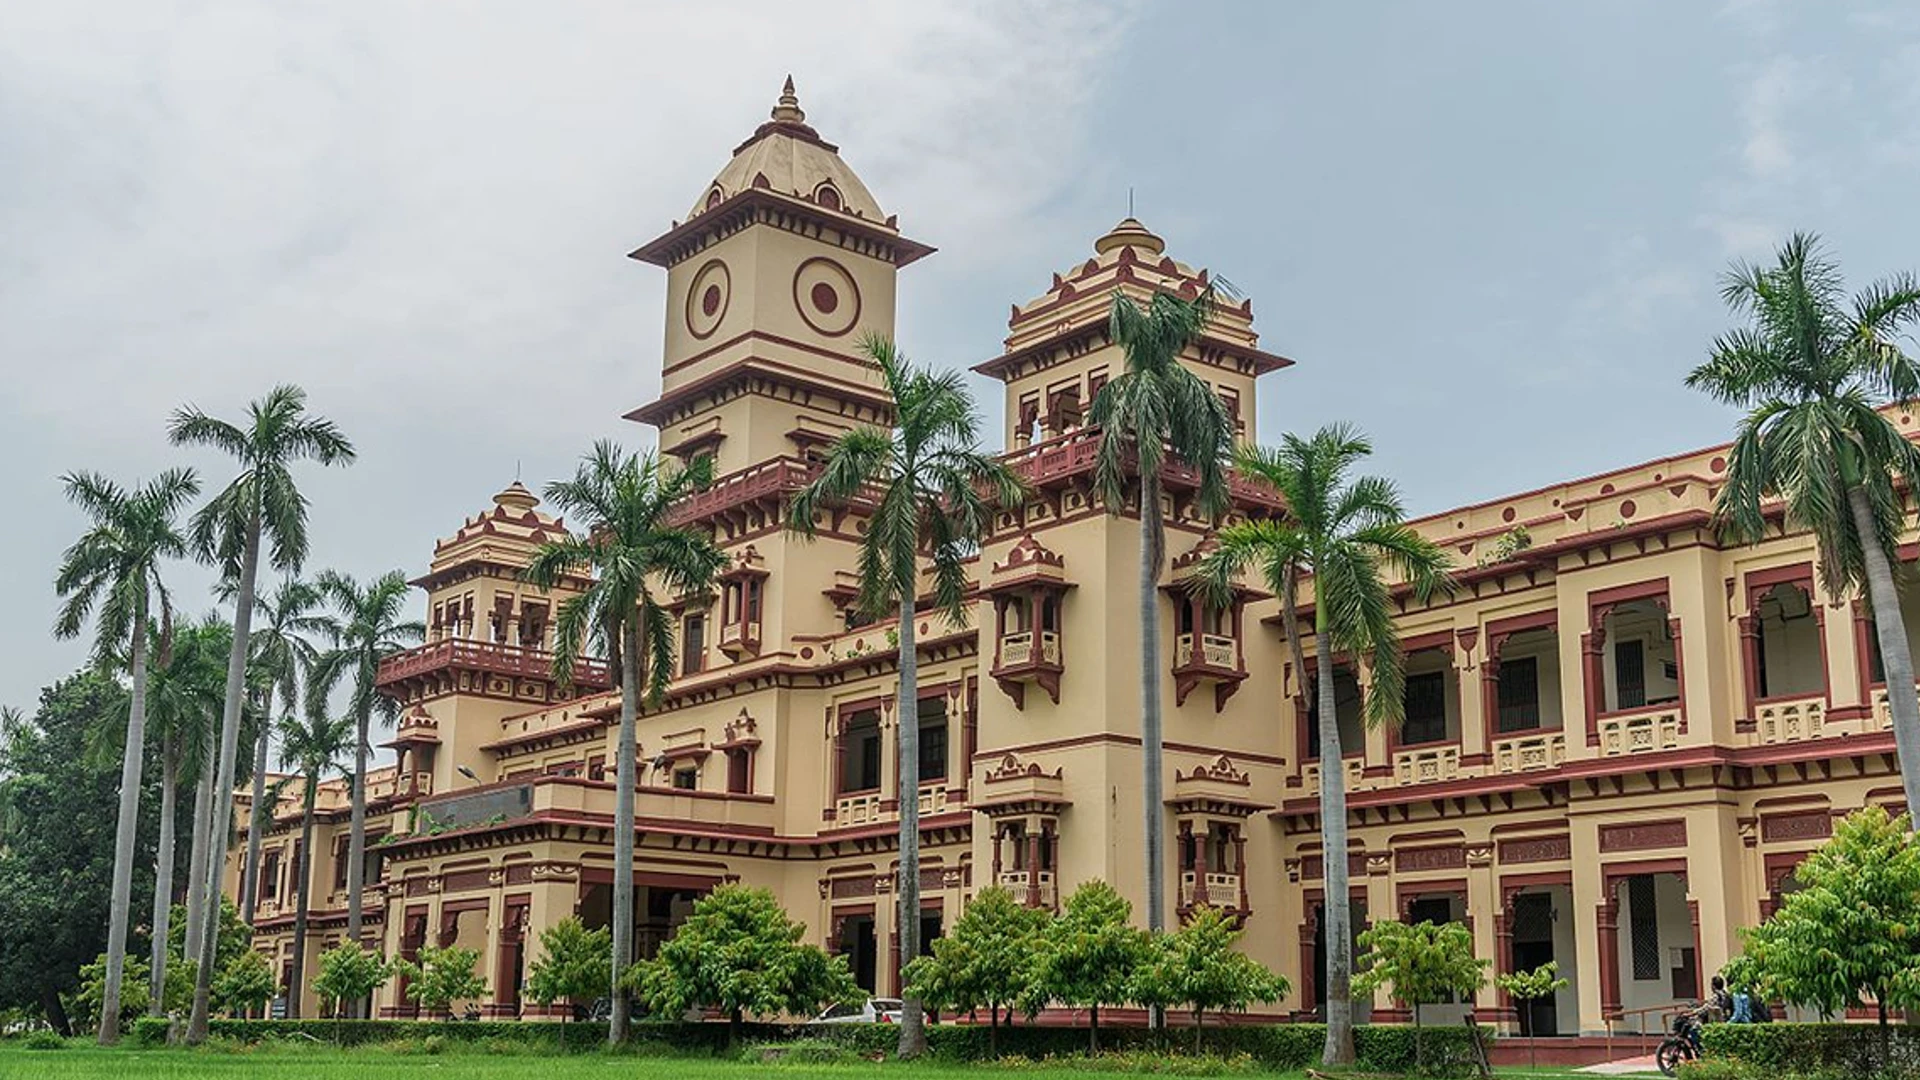 The Banaras Hindu University offers a scholarship of Rs. 6000 to deserving students